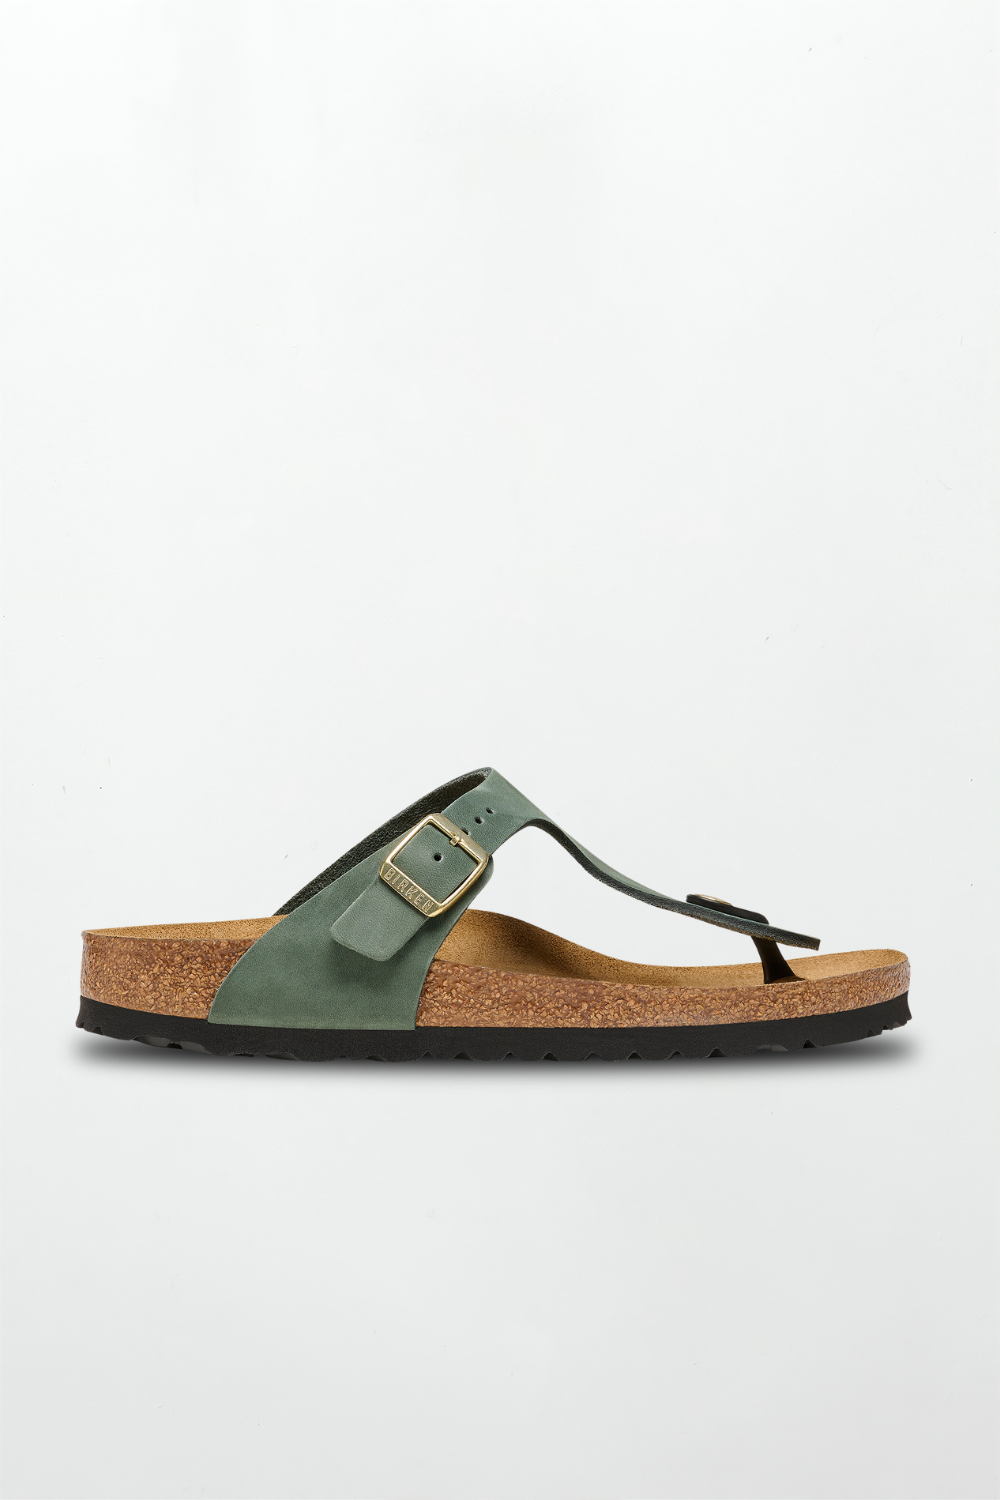 Gizeh Nubuck Leather in Thyme